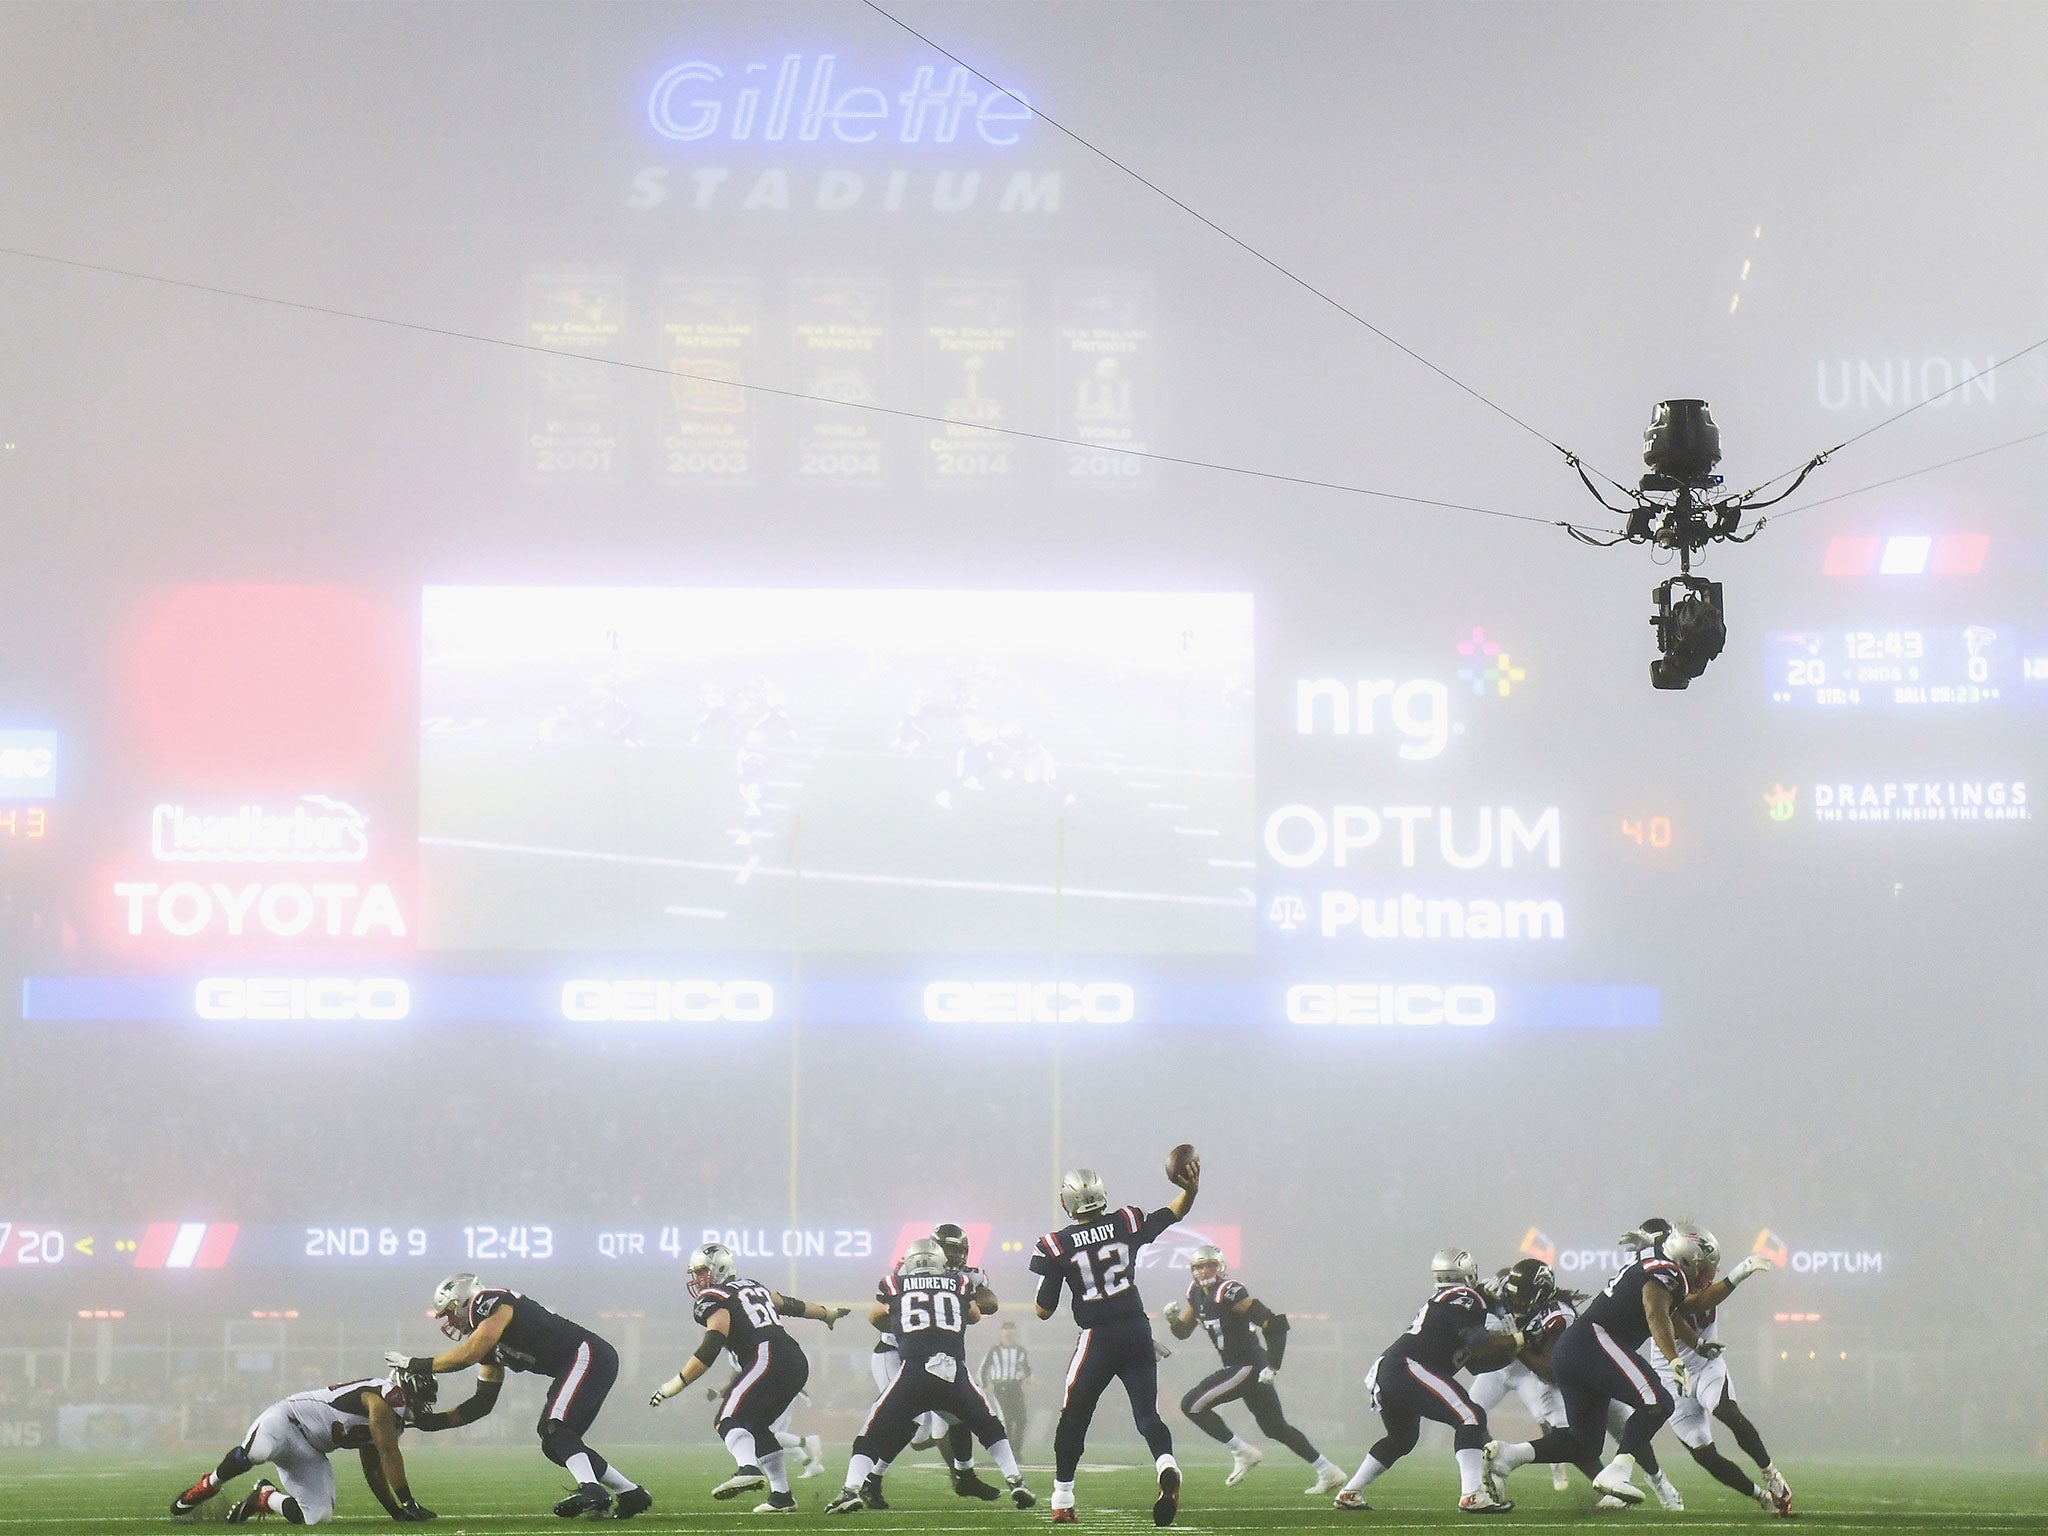 SkyCam offered a glimpse of what sports broadcasting could look like in years to come